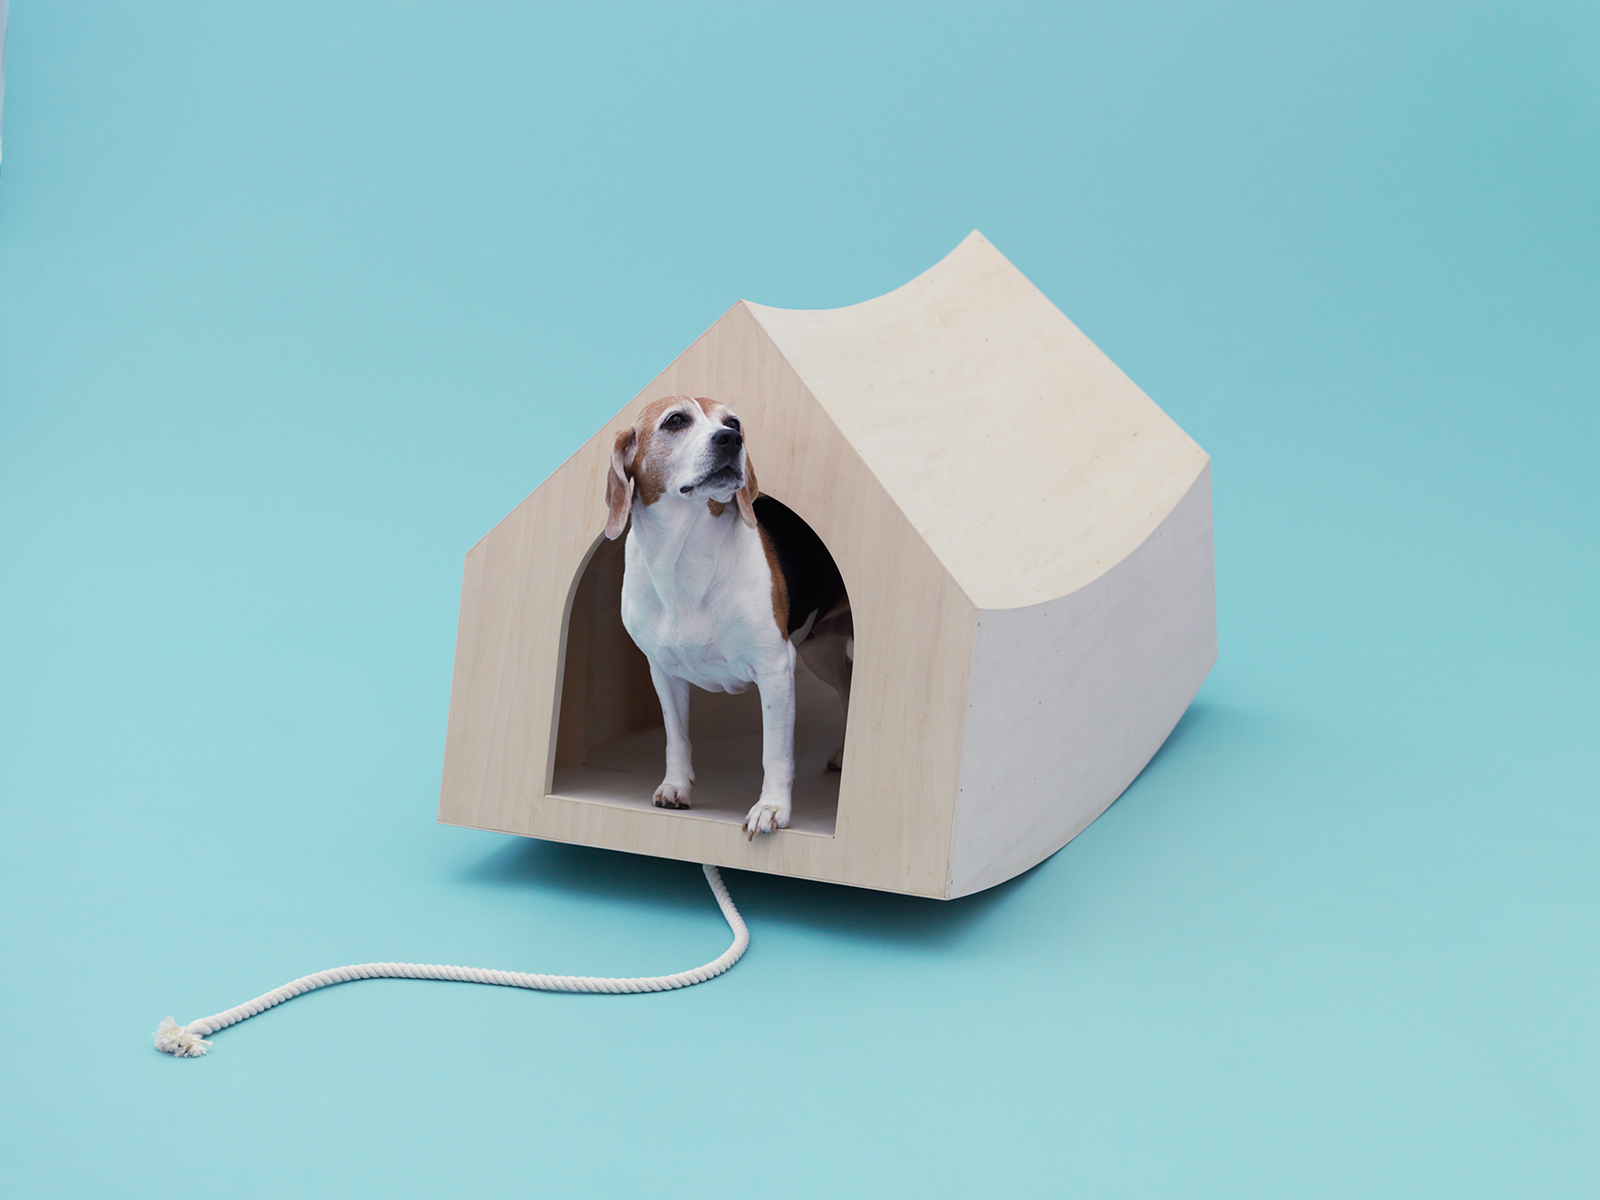 Photo: courtesy of Architecture for Dogs